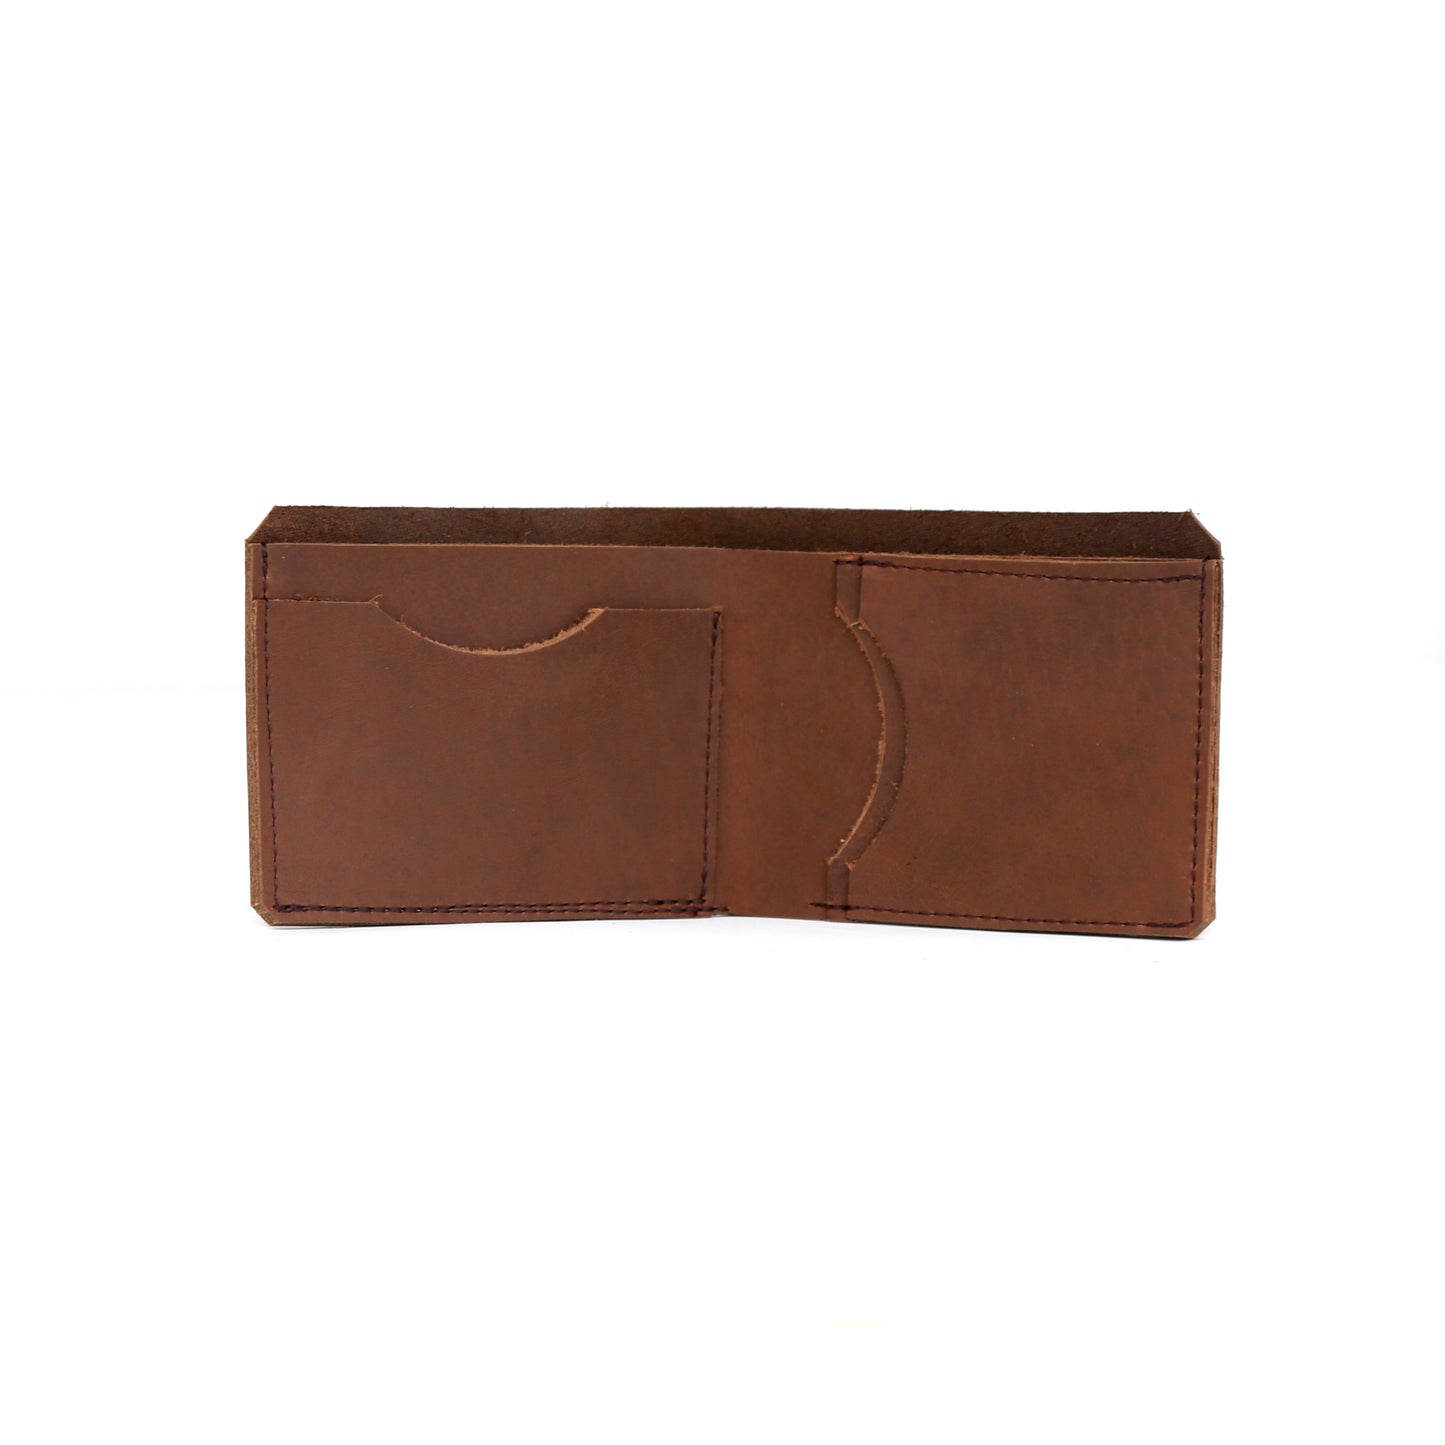 Bi Fold Wallet in Brown Leather - handcrafted by Market Canvas Leather in Tofino, BC, Canada